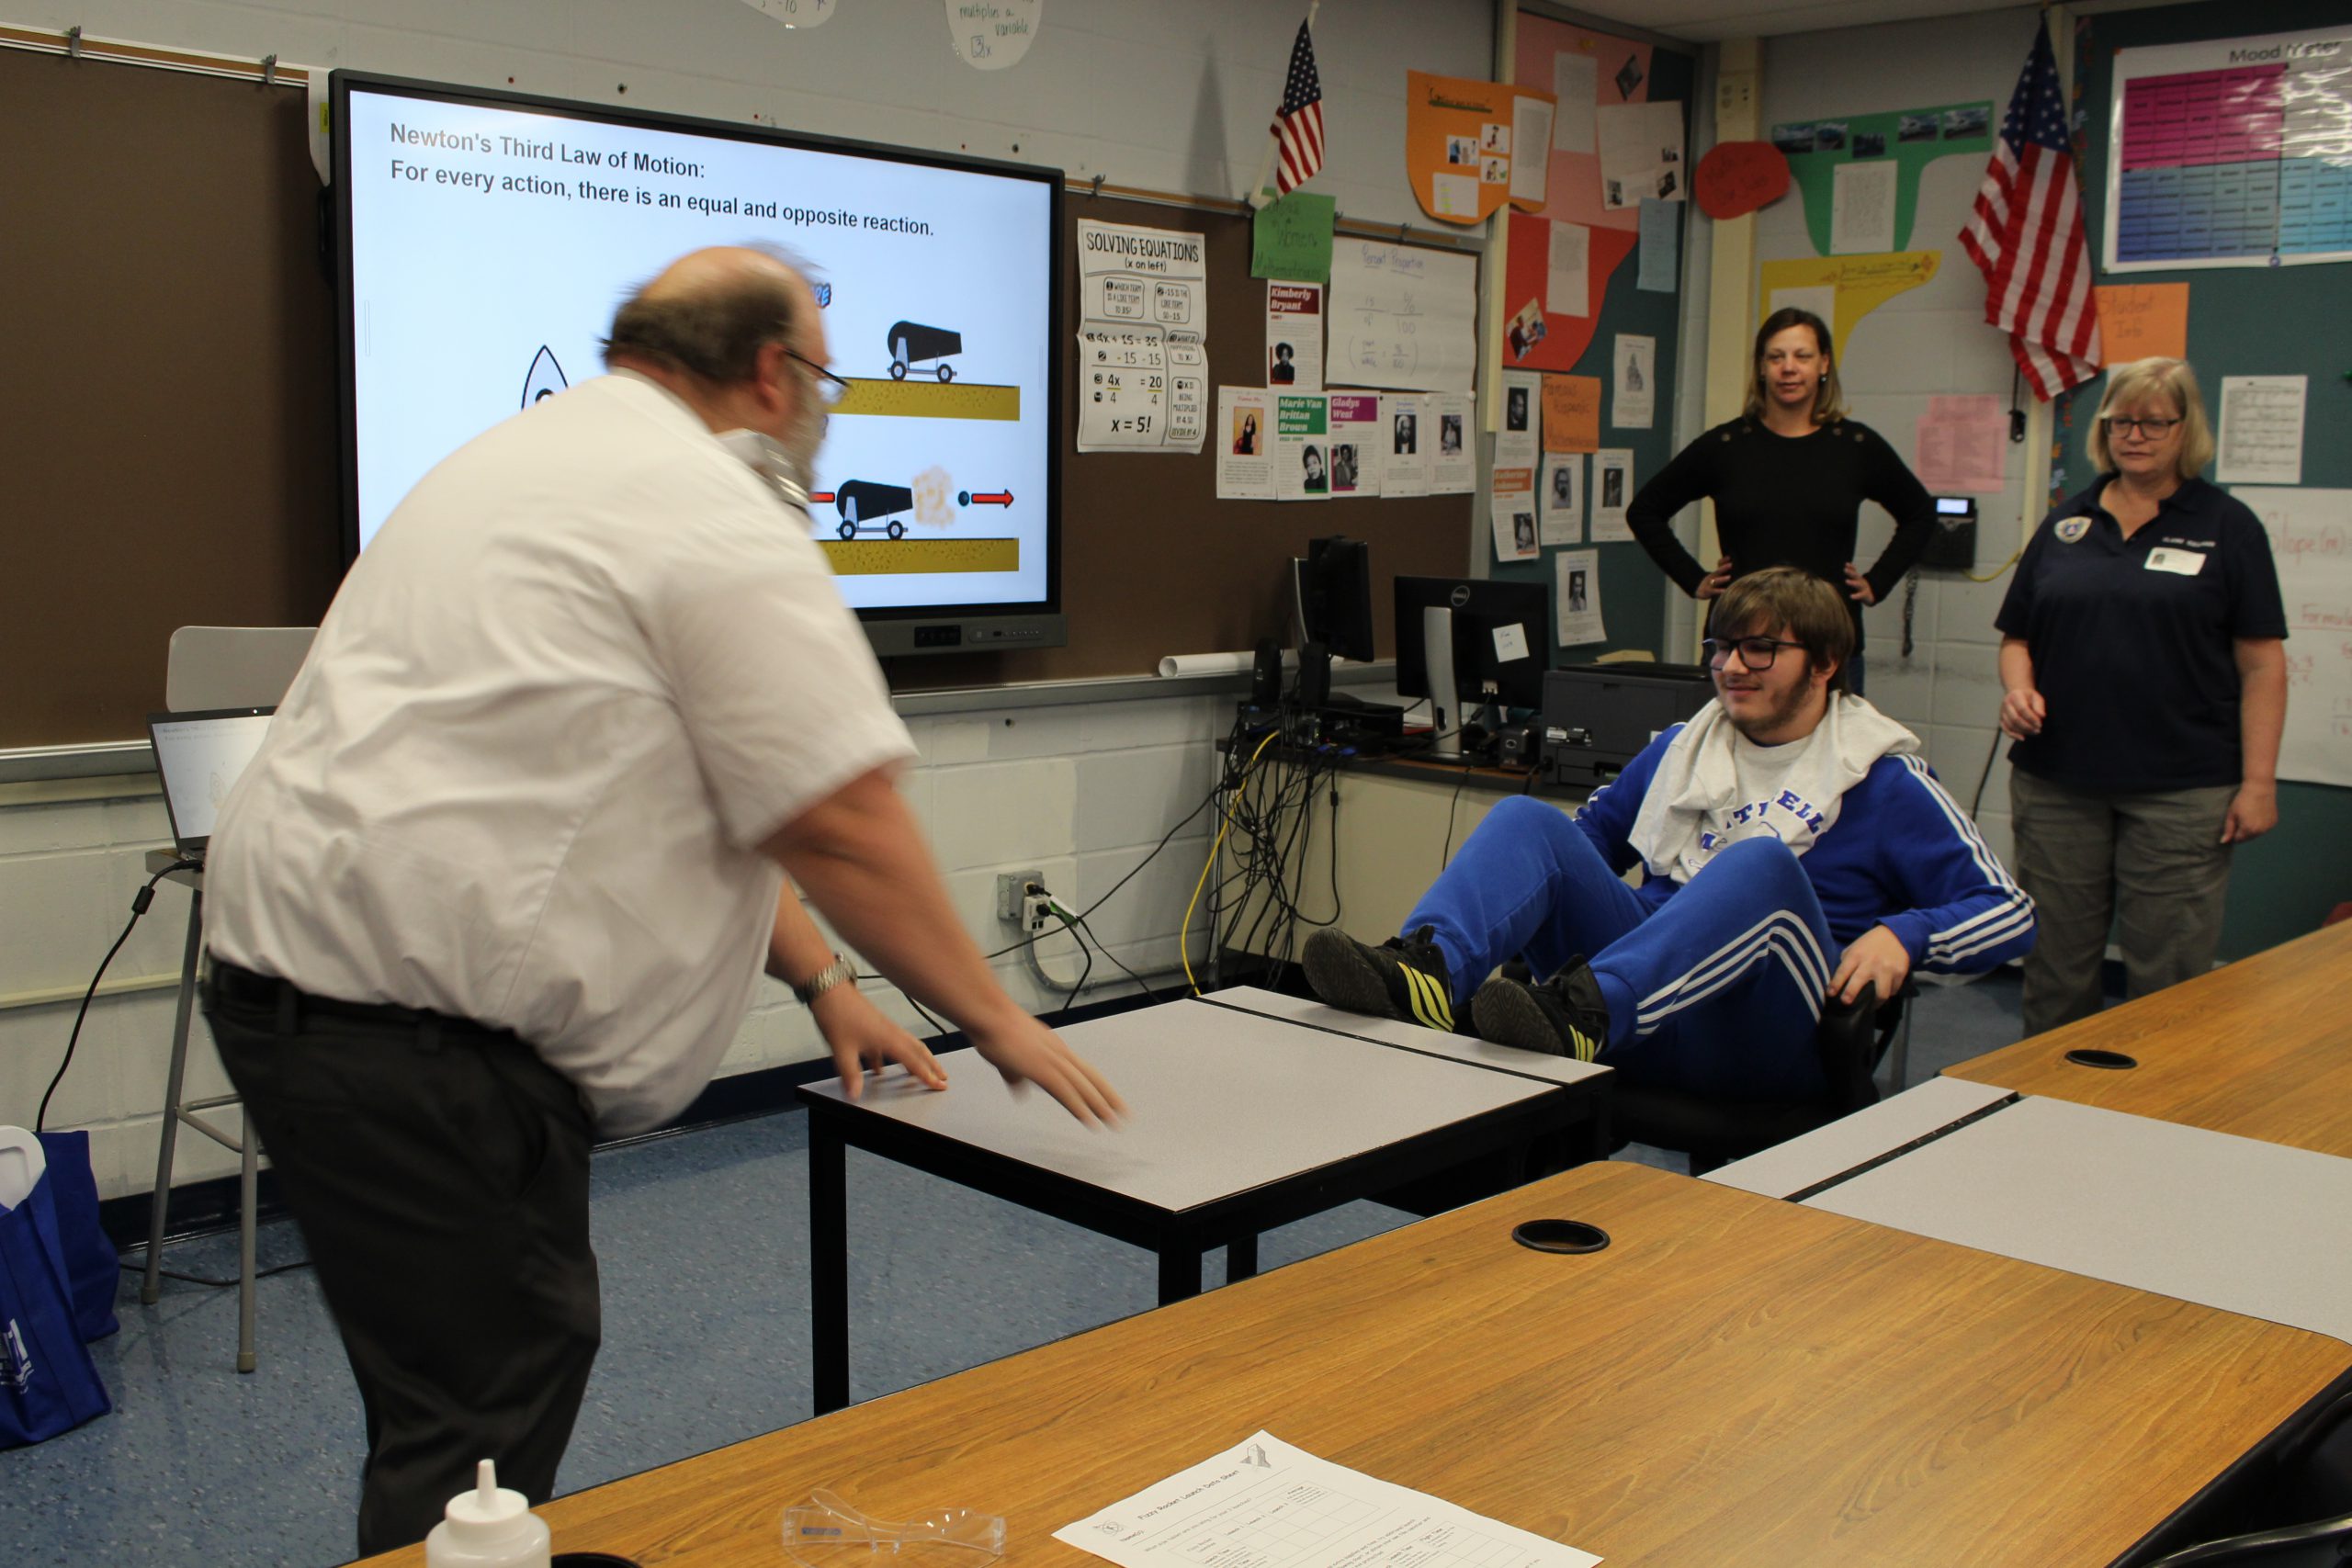 a student is seated in a chair and is using his legs to push a desk towards a man. The man is pushing the desk back towards the student. It's part of a experiment designed to demonstrate the third law of motion